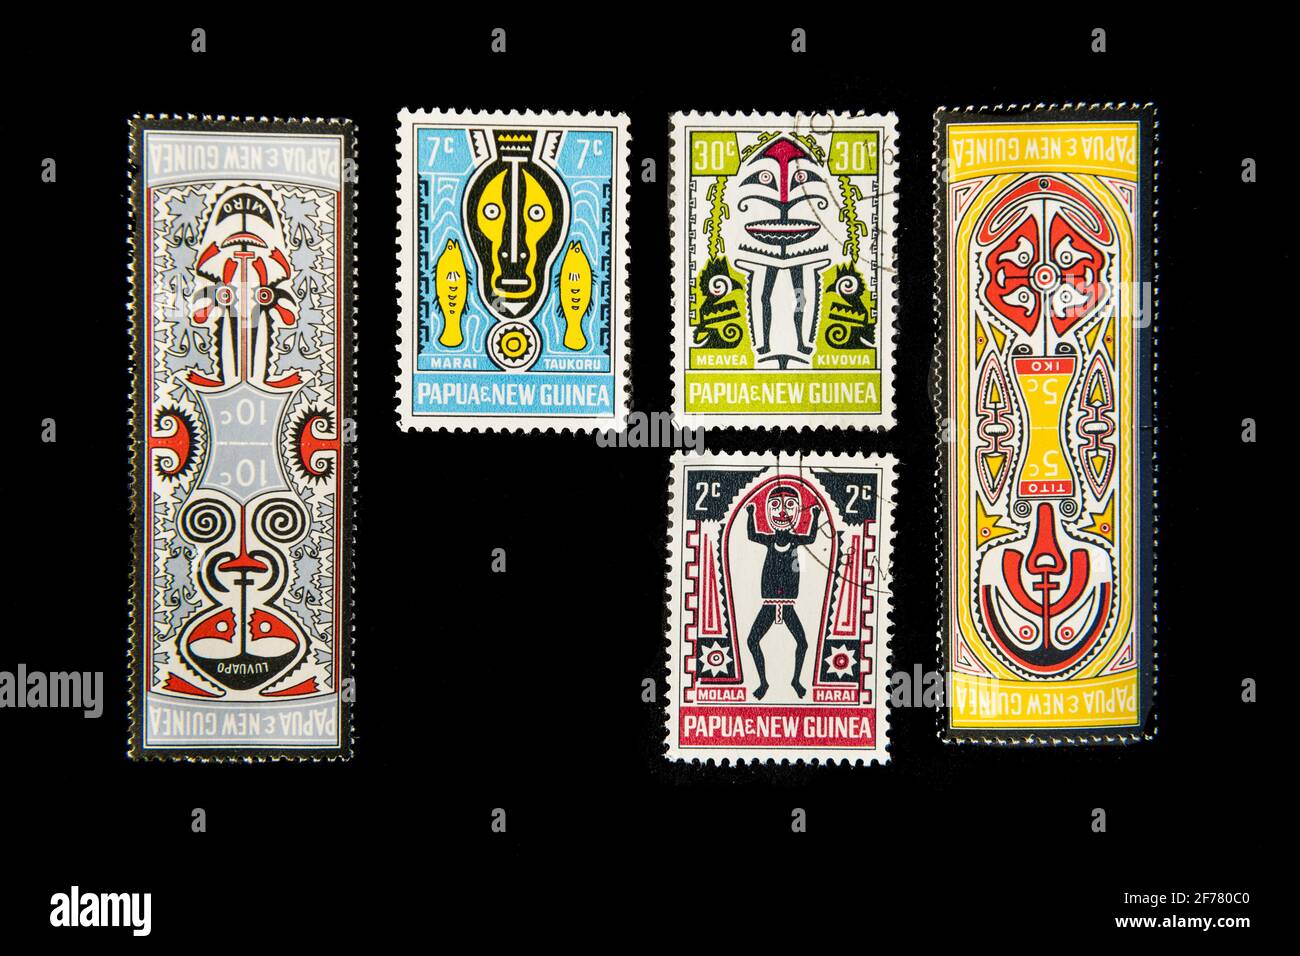 Papua New Guinea, Port Moresby, stamps, masks Stock Photo